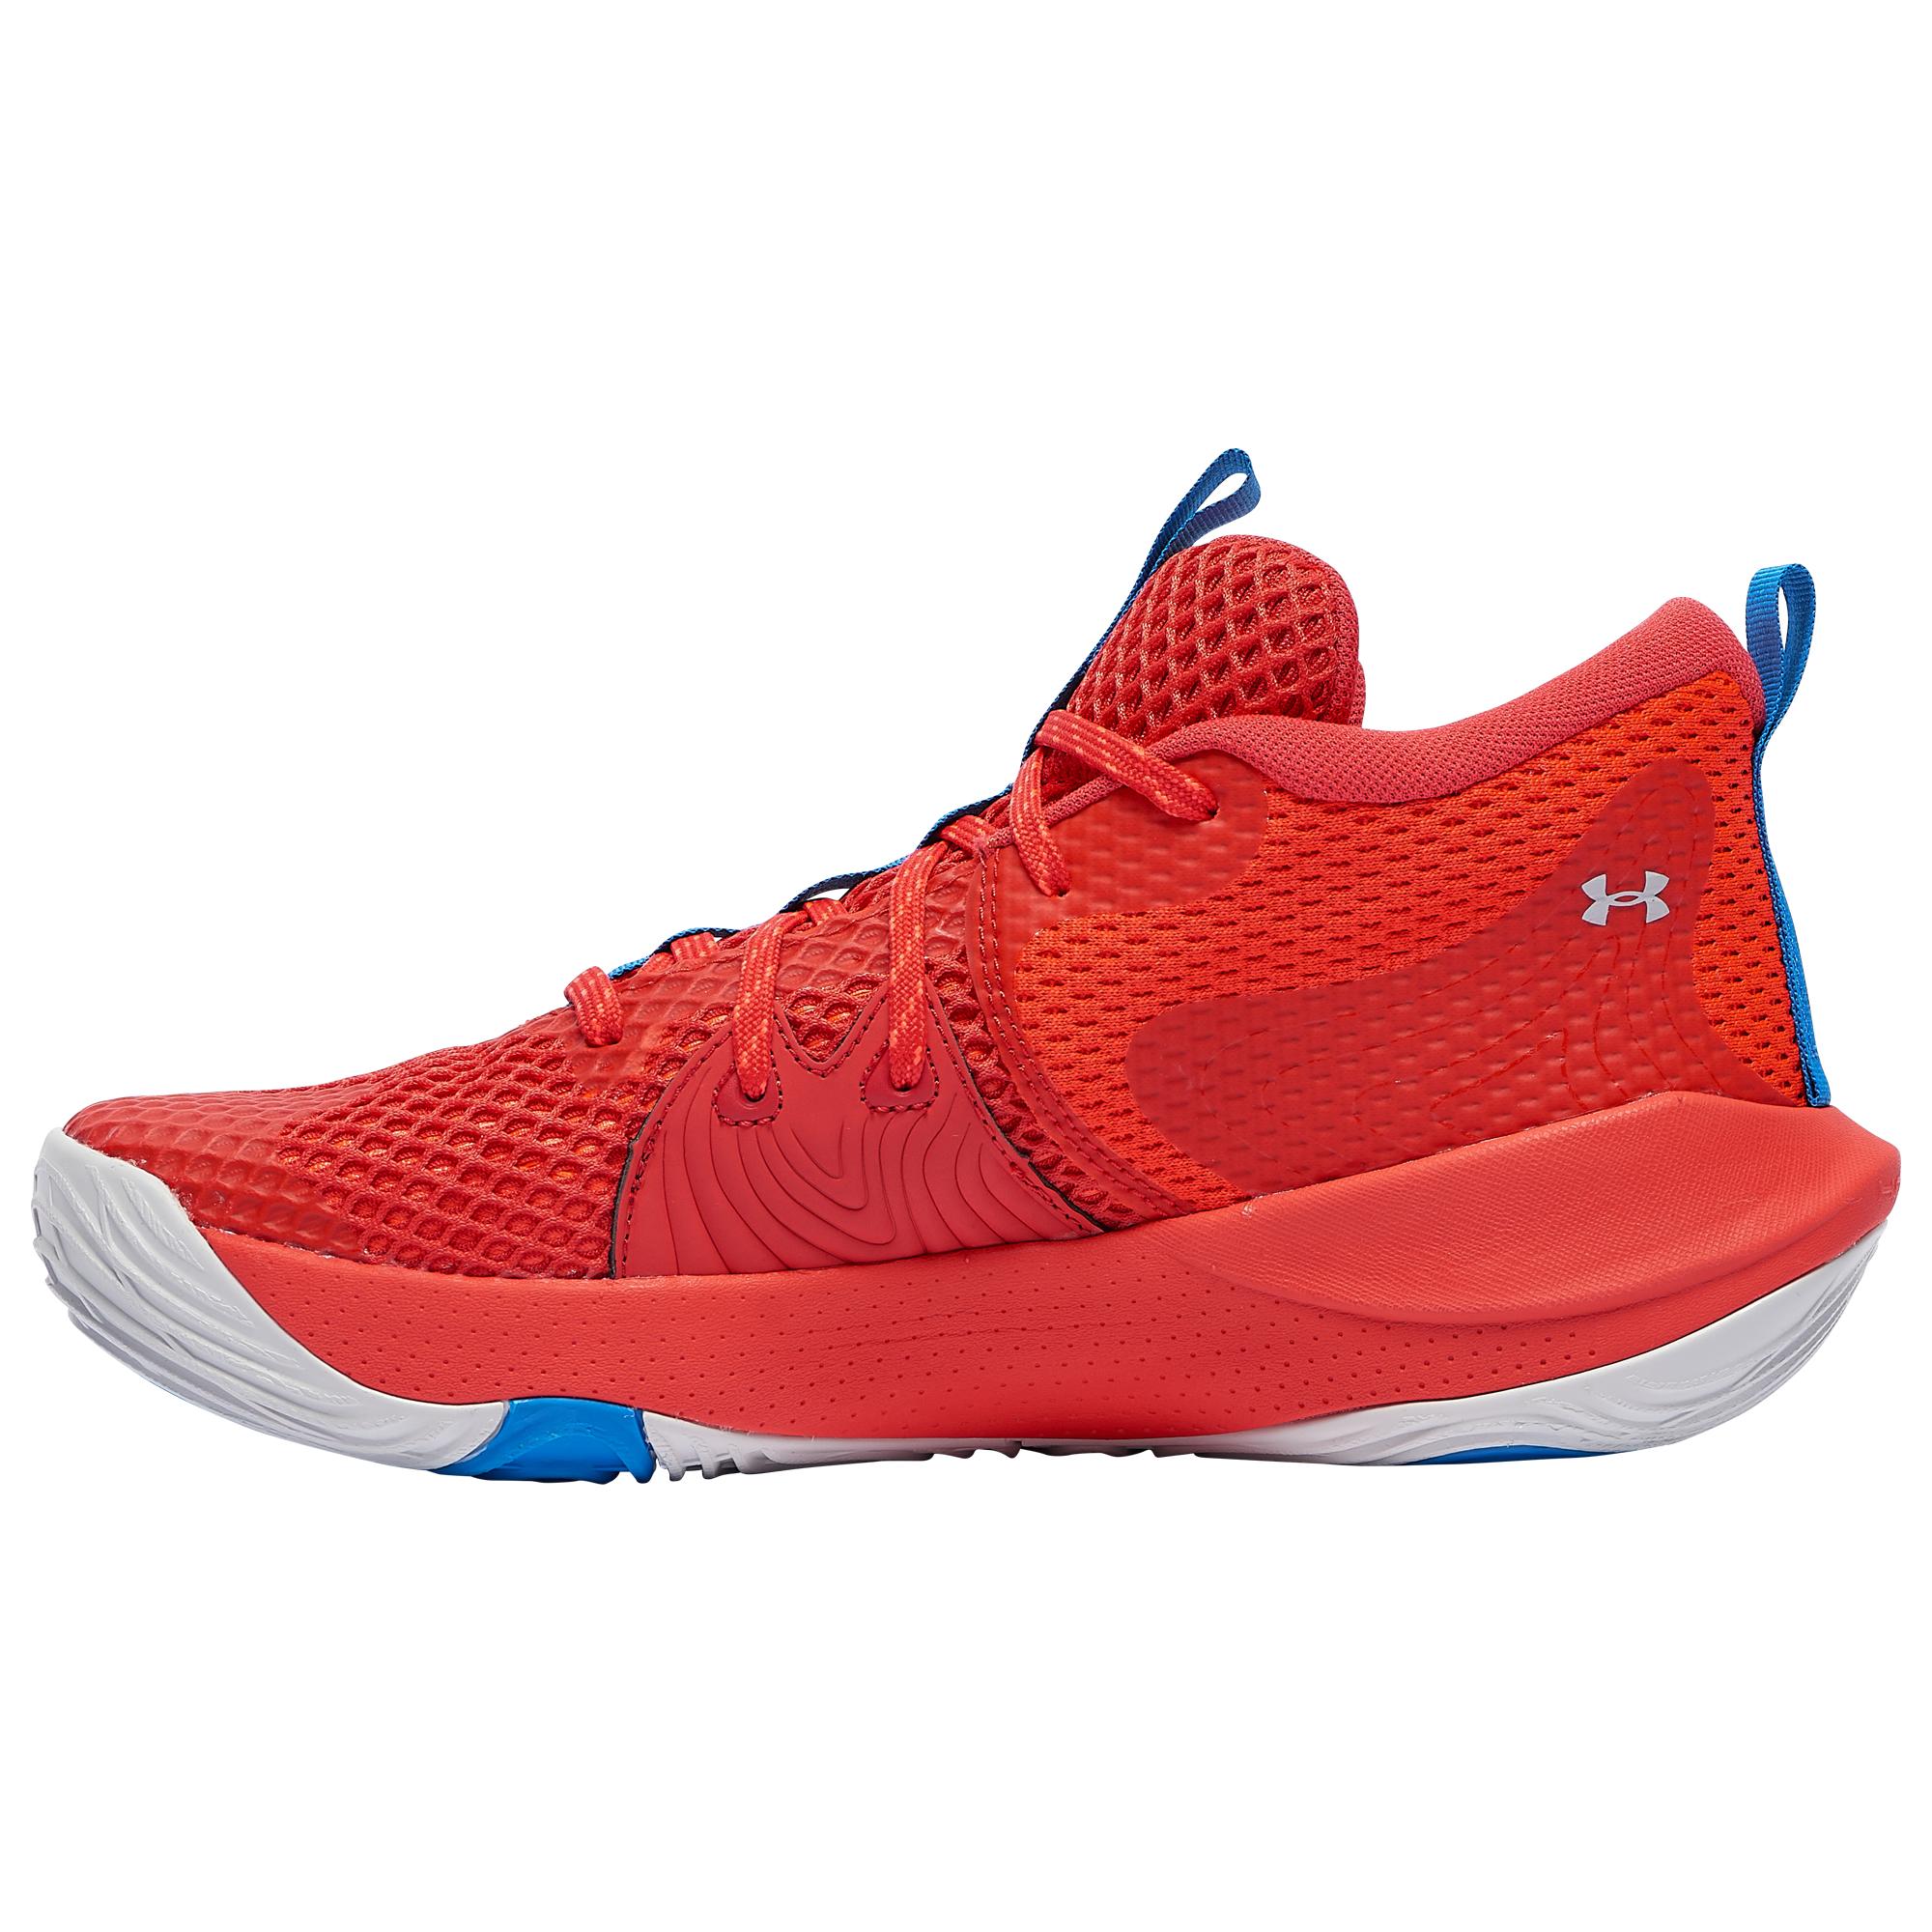 Under Armour Joel Embiid Embiid One - Basketball Shoes in Red for 